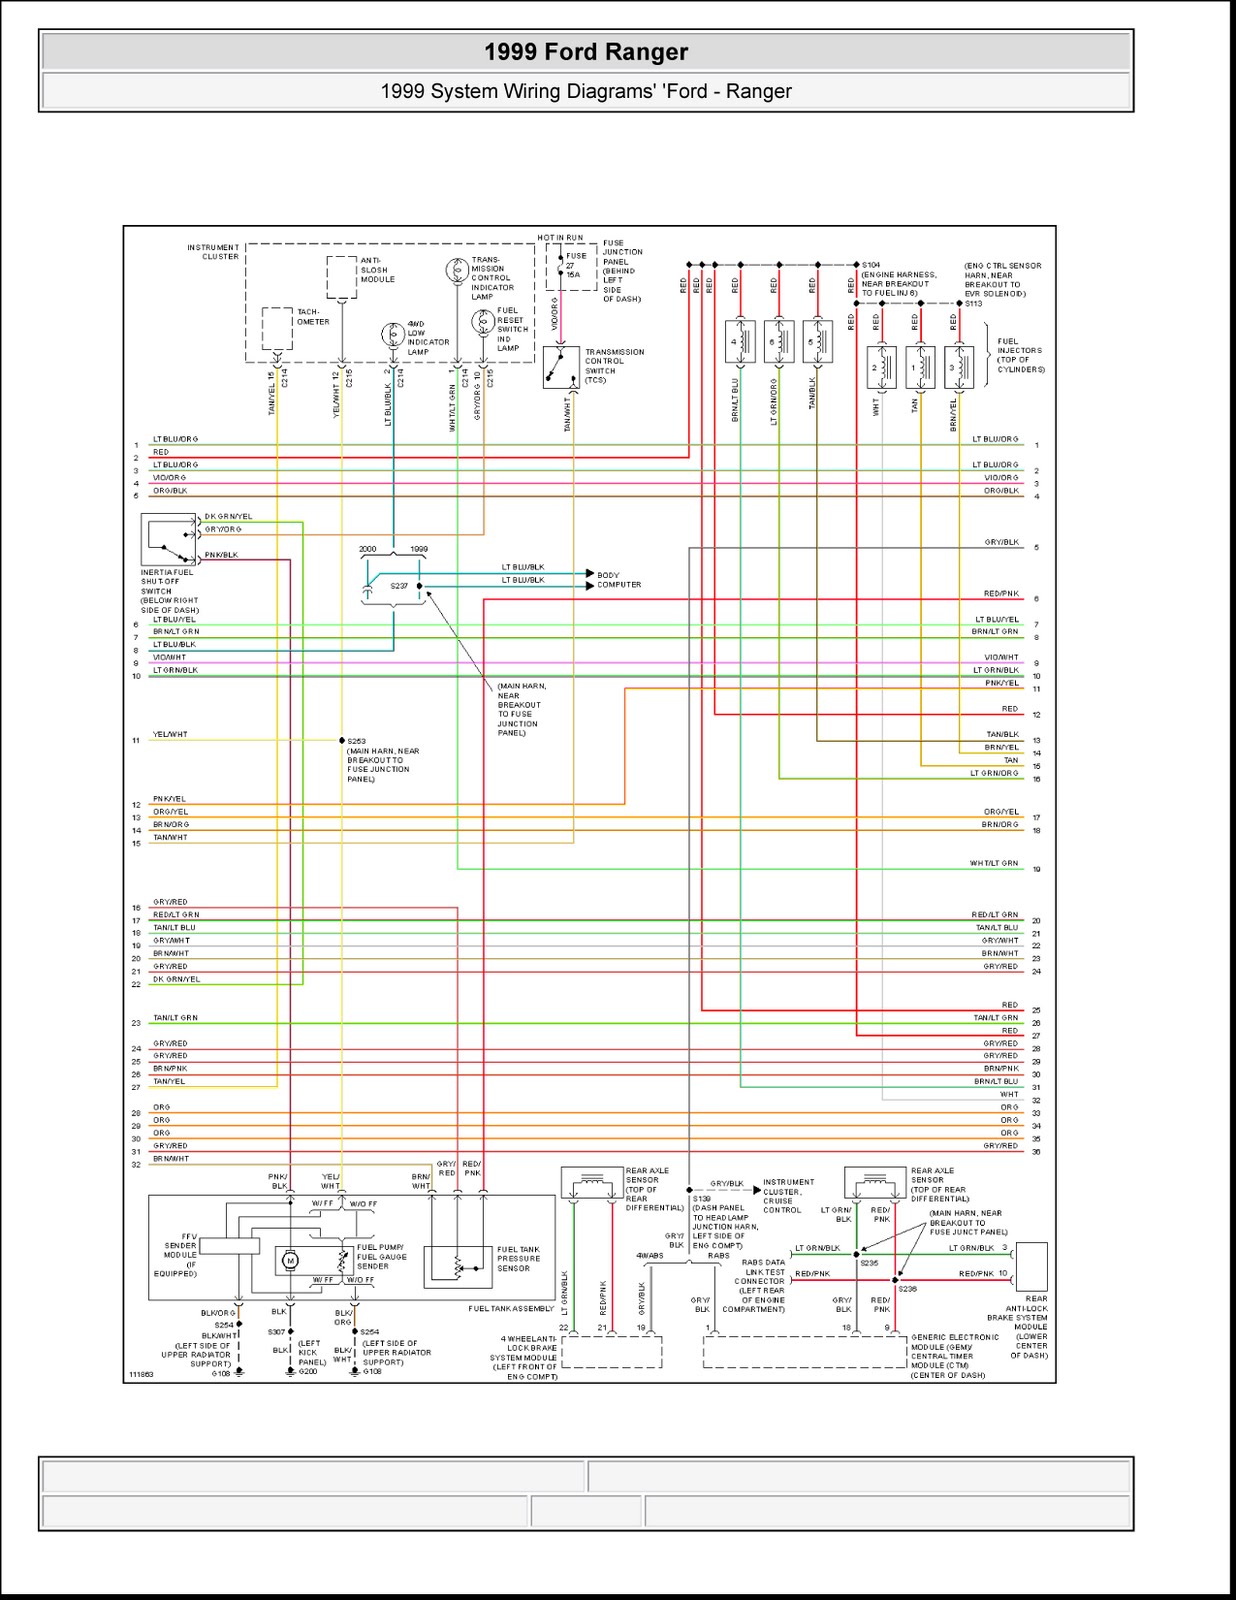 1999 Ford Ranger System Wiring Diagrams | 4 Images ...